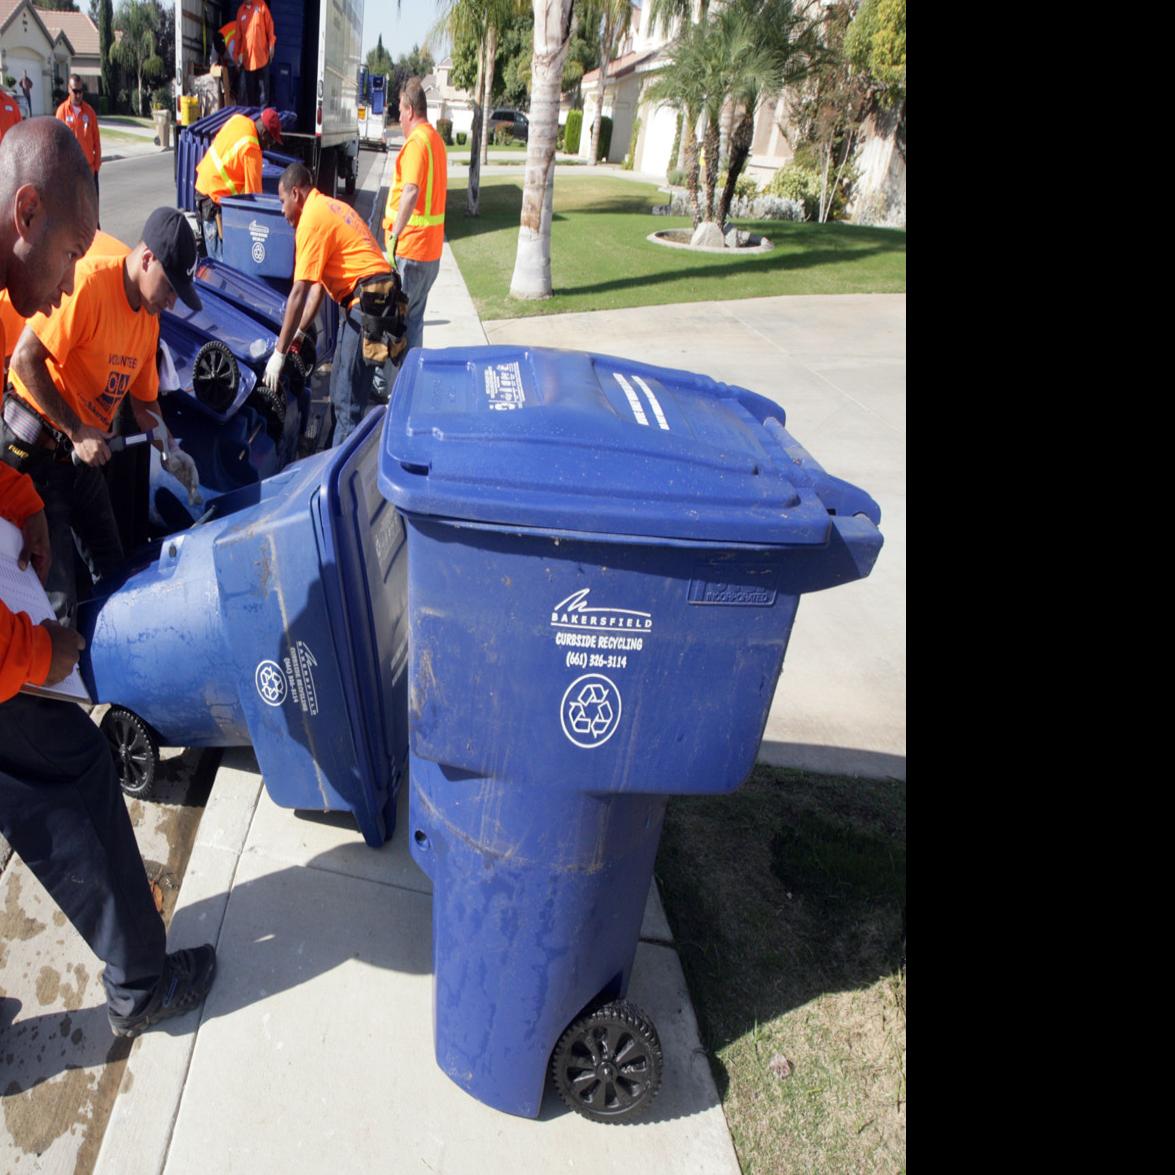 San Jose Recycling Bins: What Goes In & What Stays Out